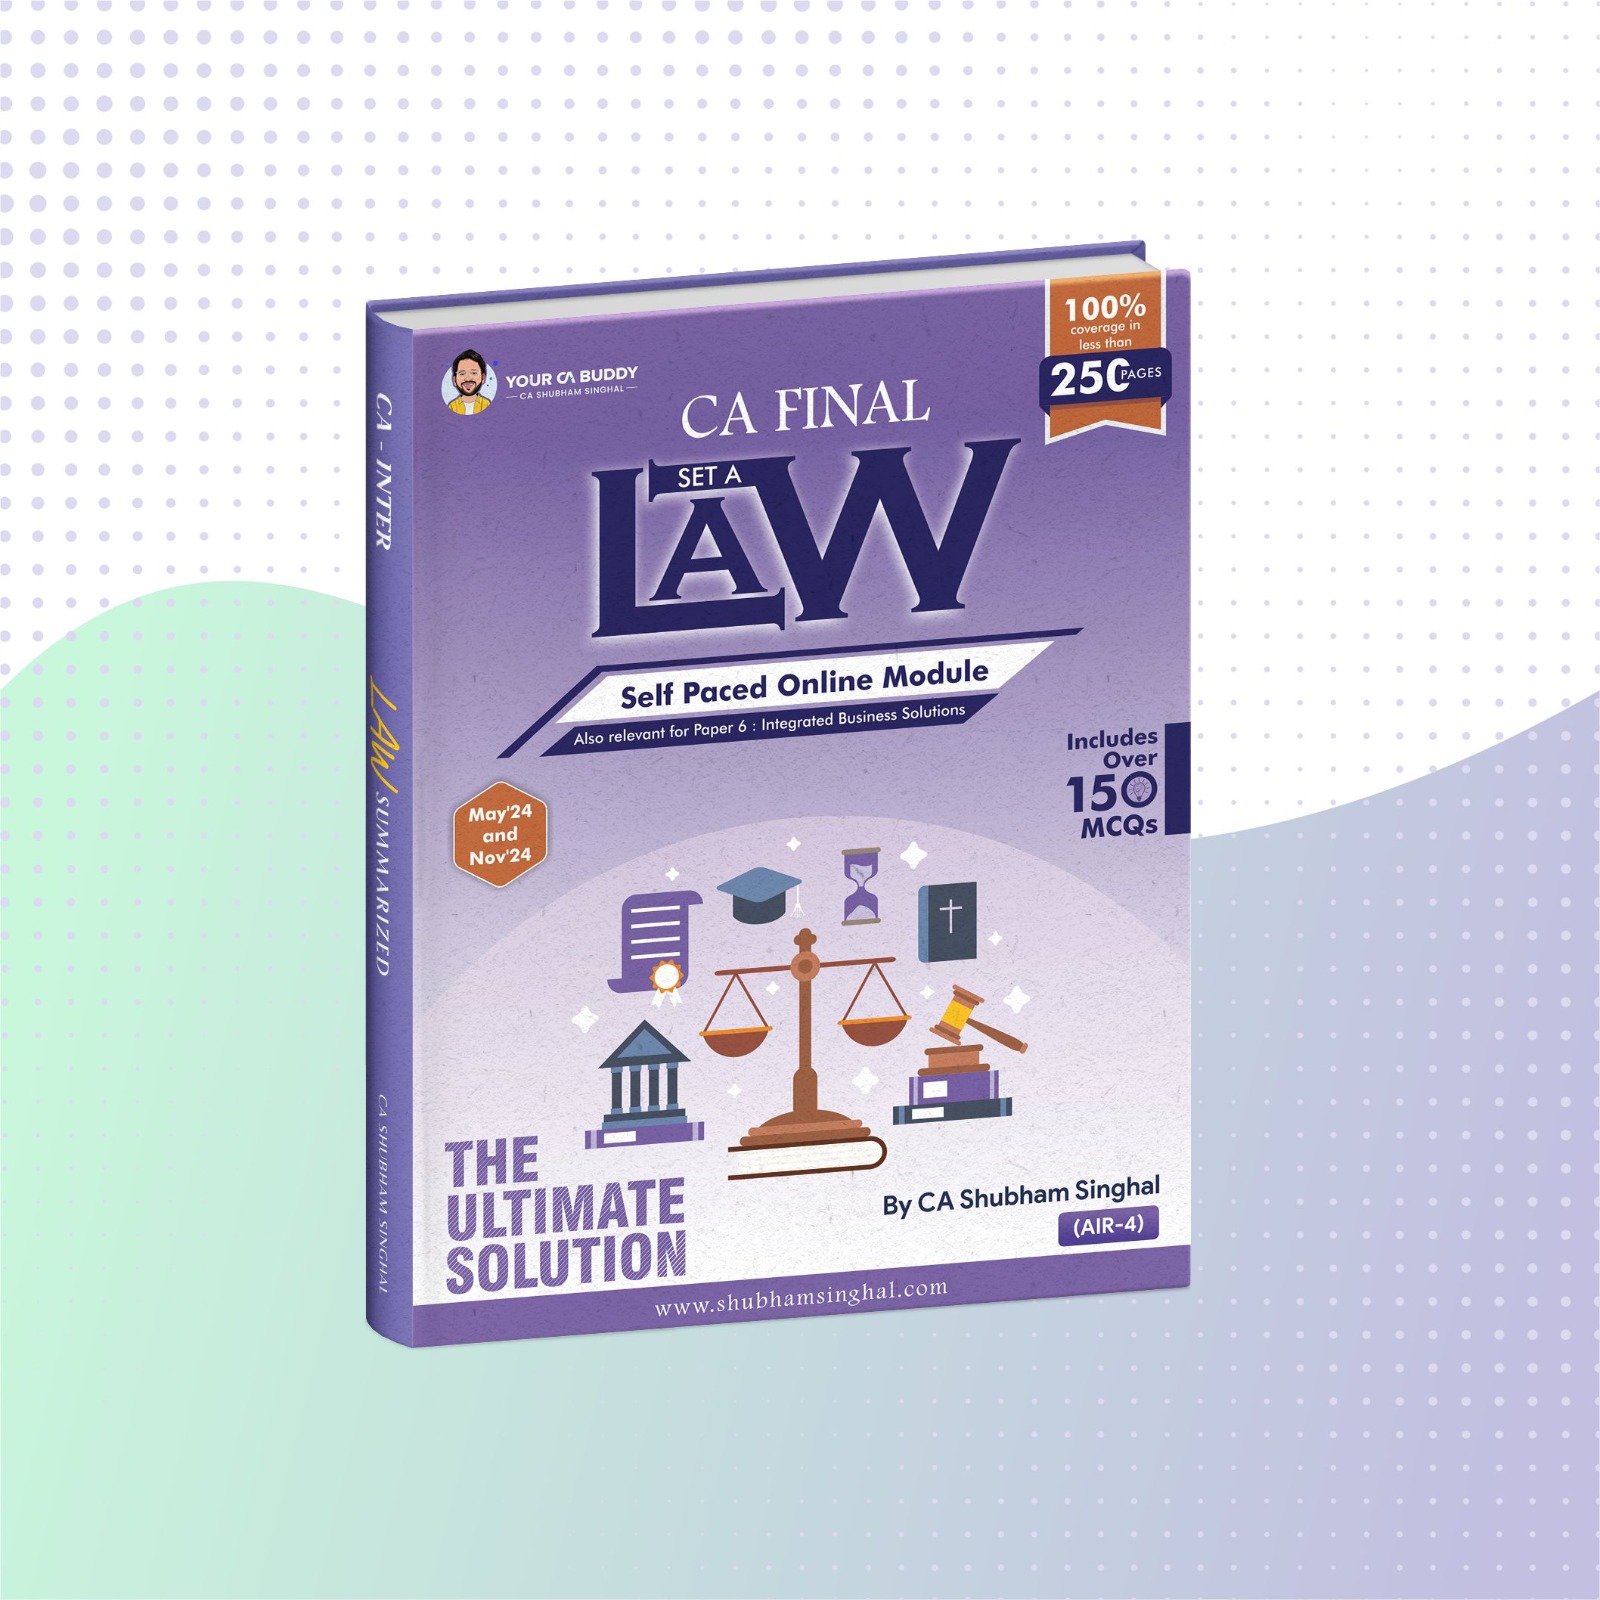 ca-final-set-a-self-paced-online-module-law-by-ca-shubham-singhal